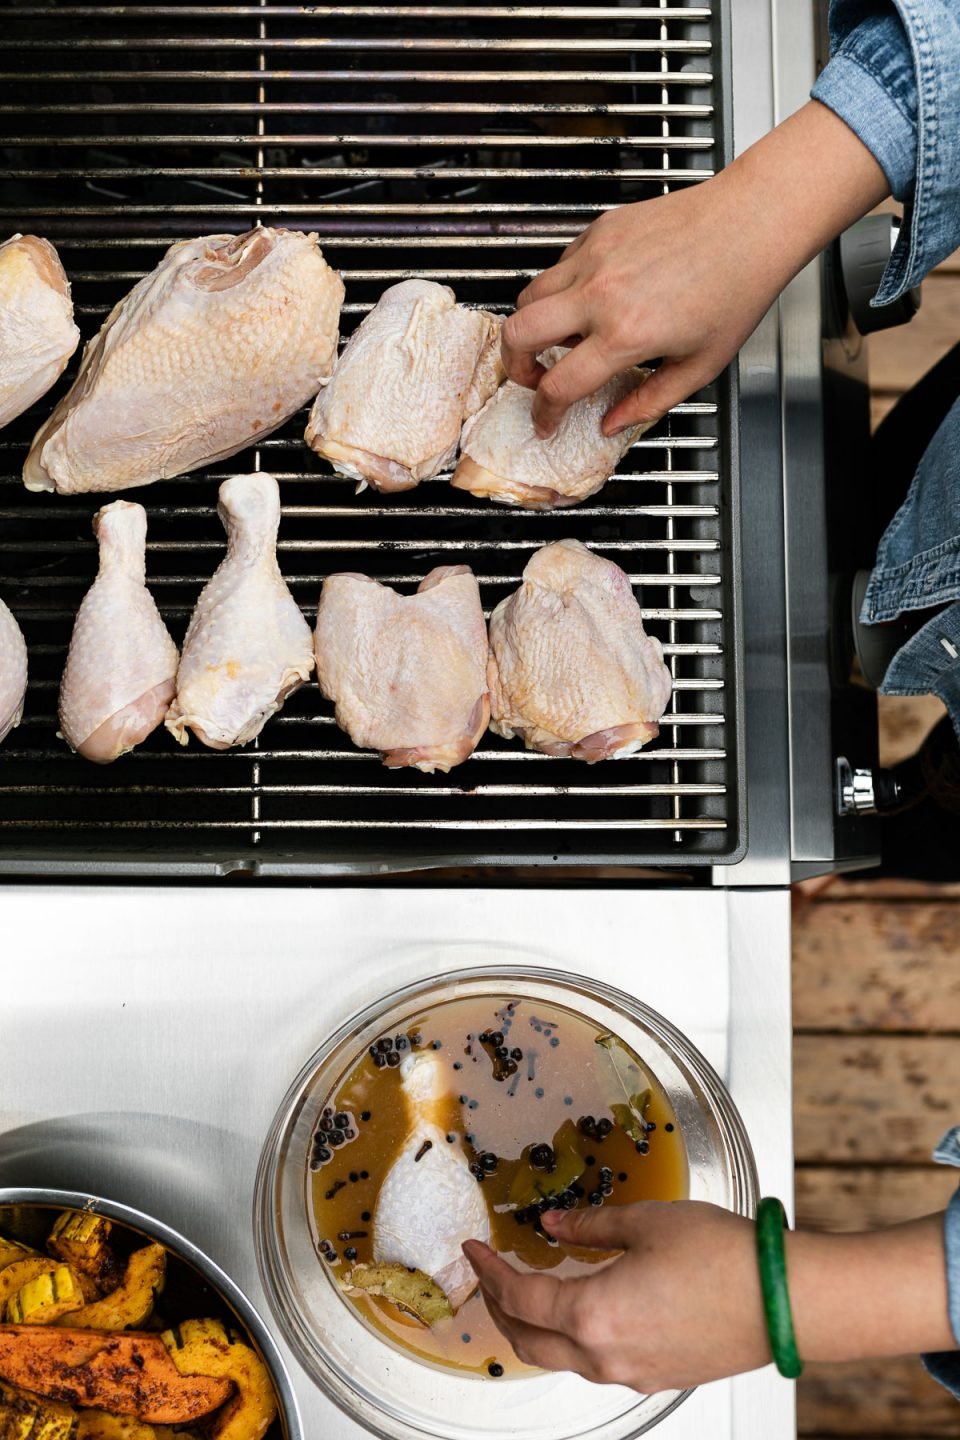 Woman's hands reaching into the frame, removing chicken from apple cider brine & placing on grill grates.